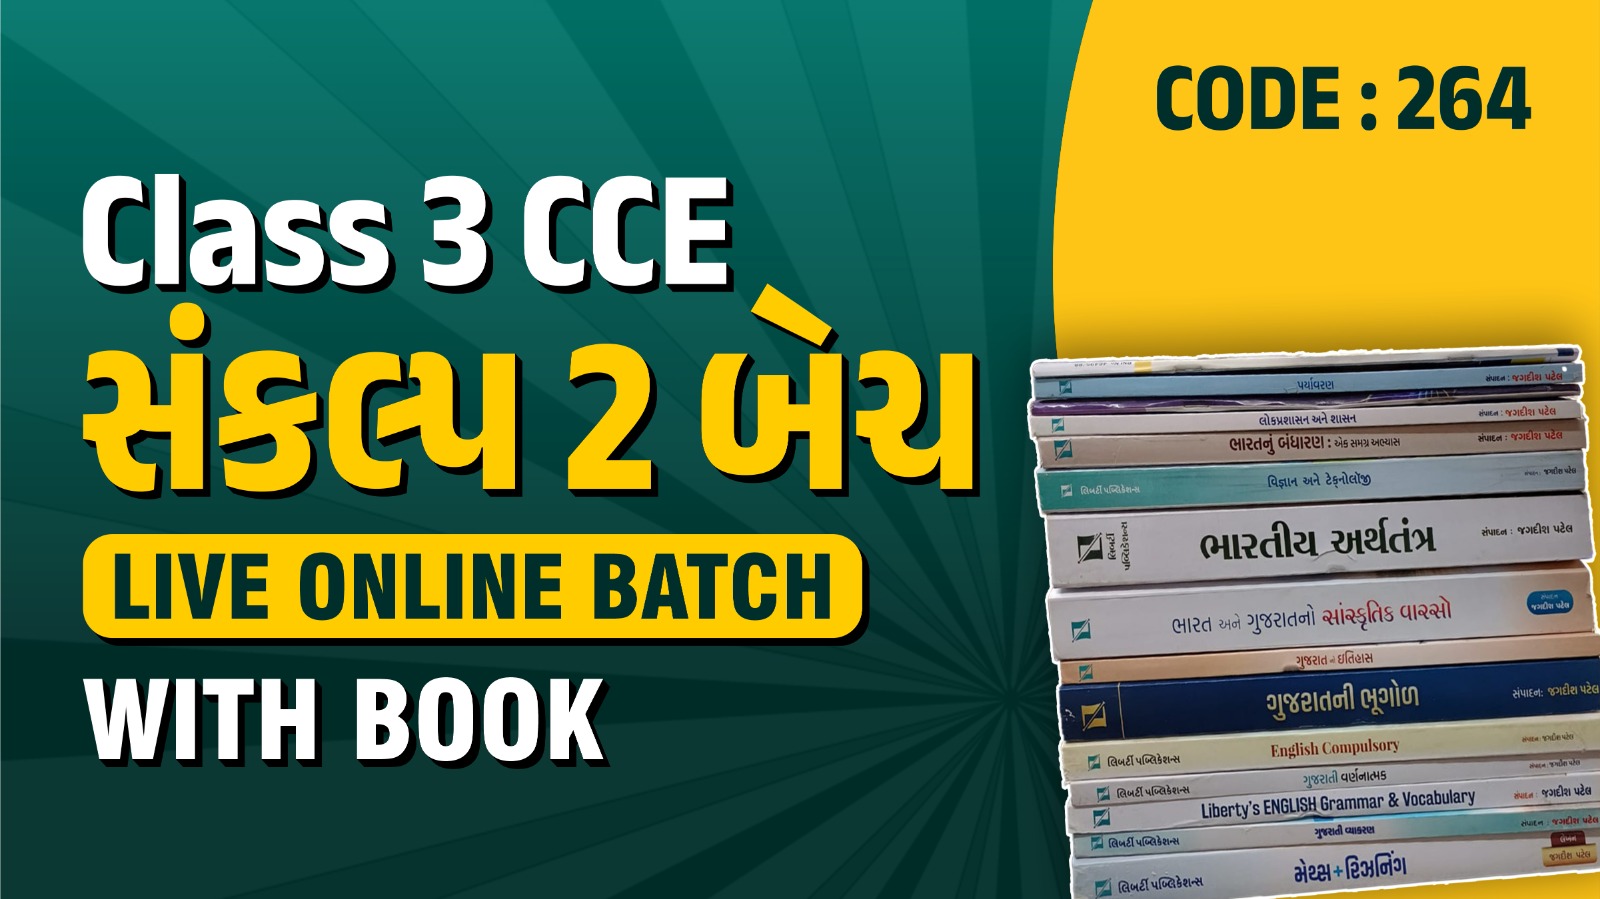 Sankalp 2- Class 3 CCE- LIVE ONLINE- With BOOK- Code 264